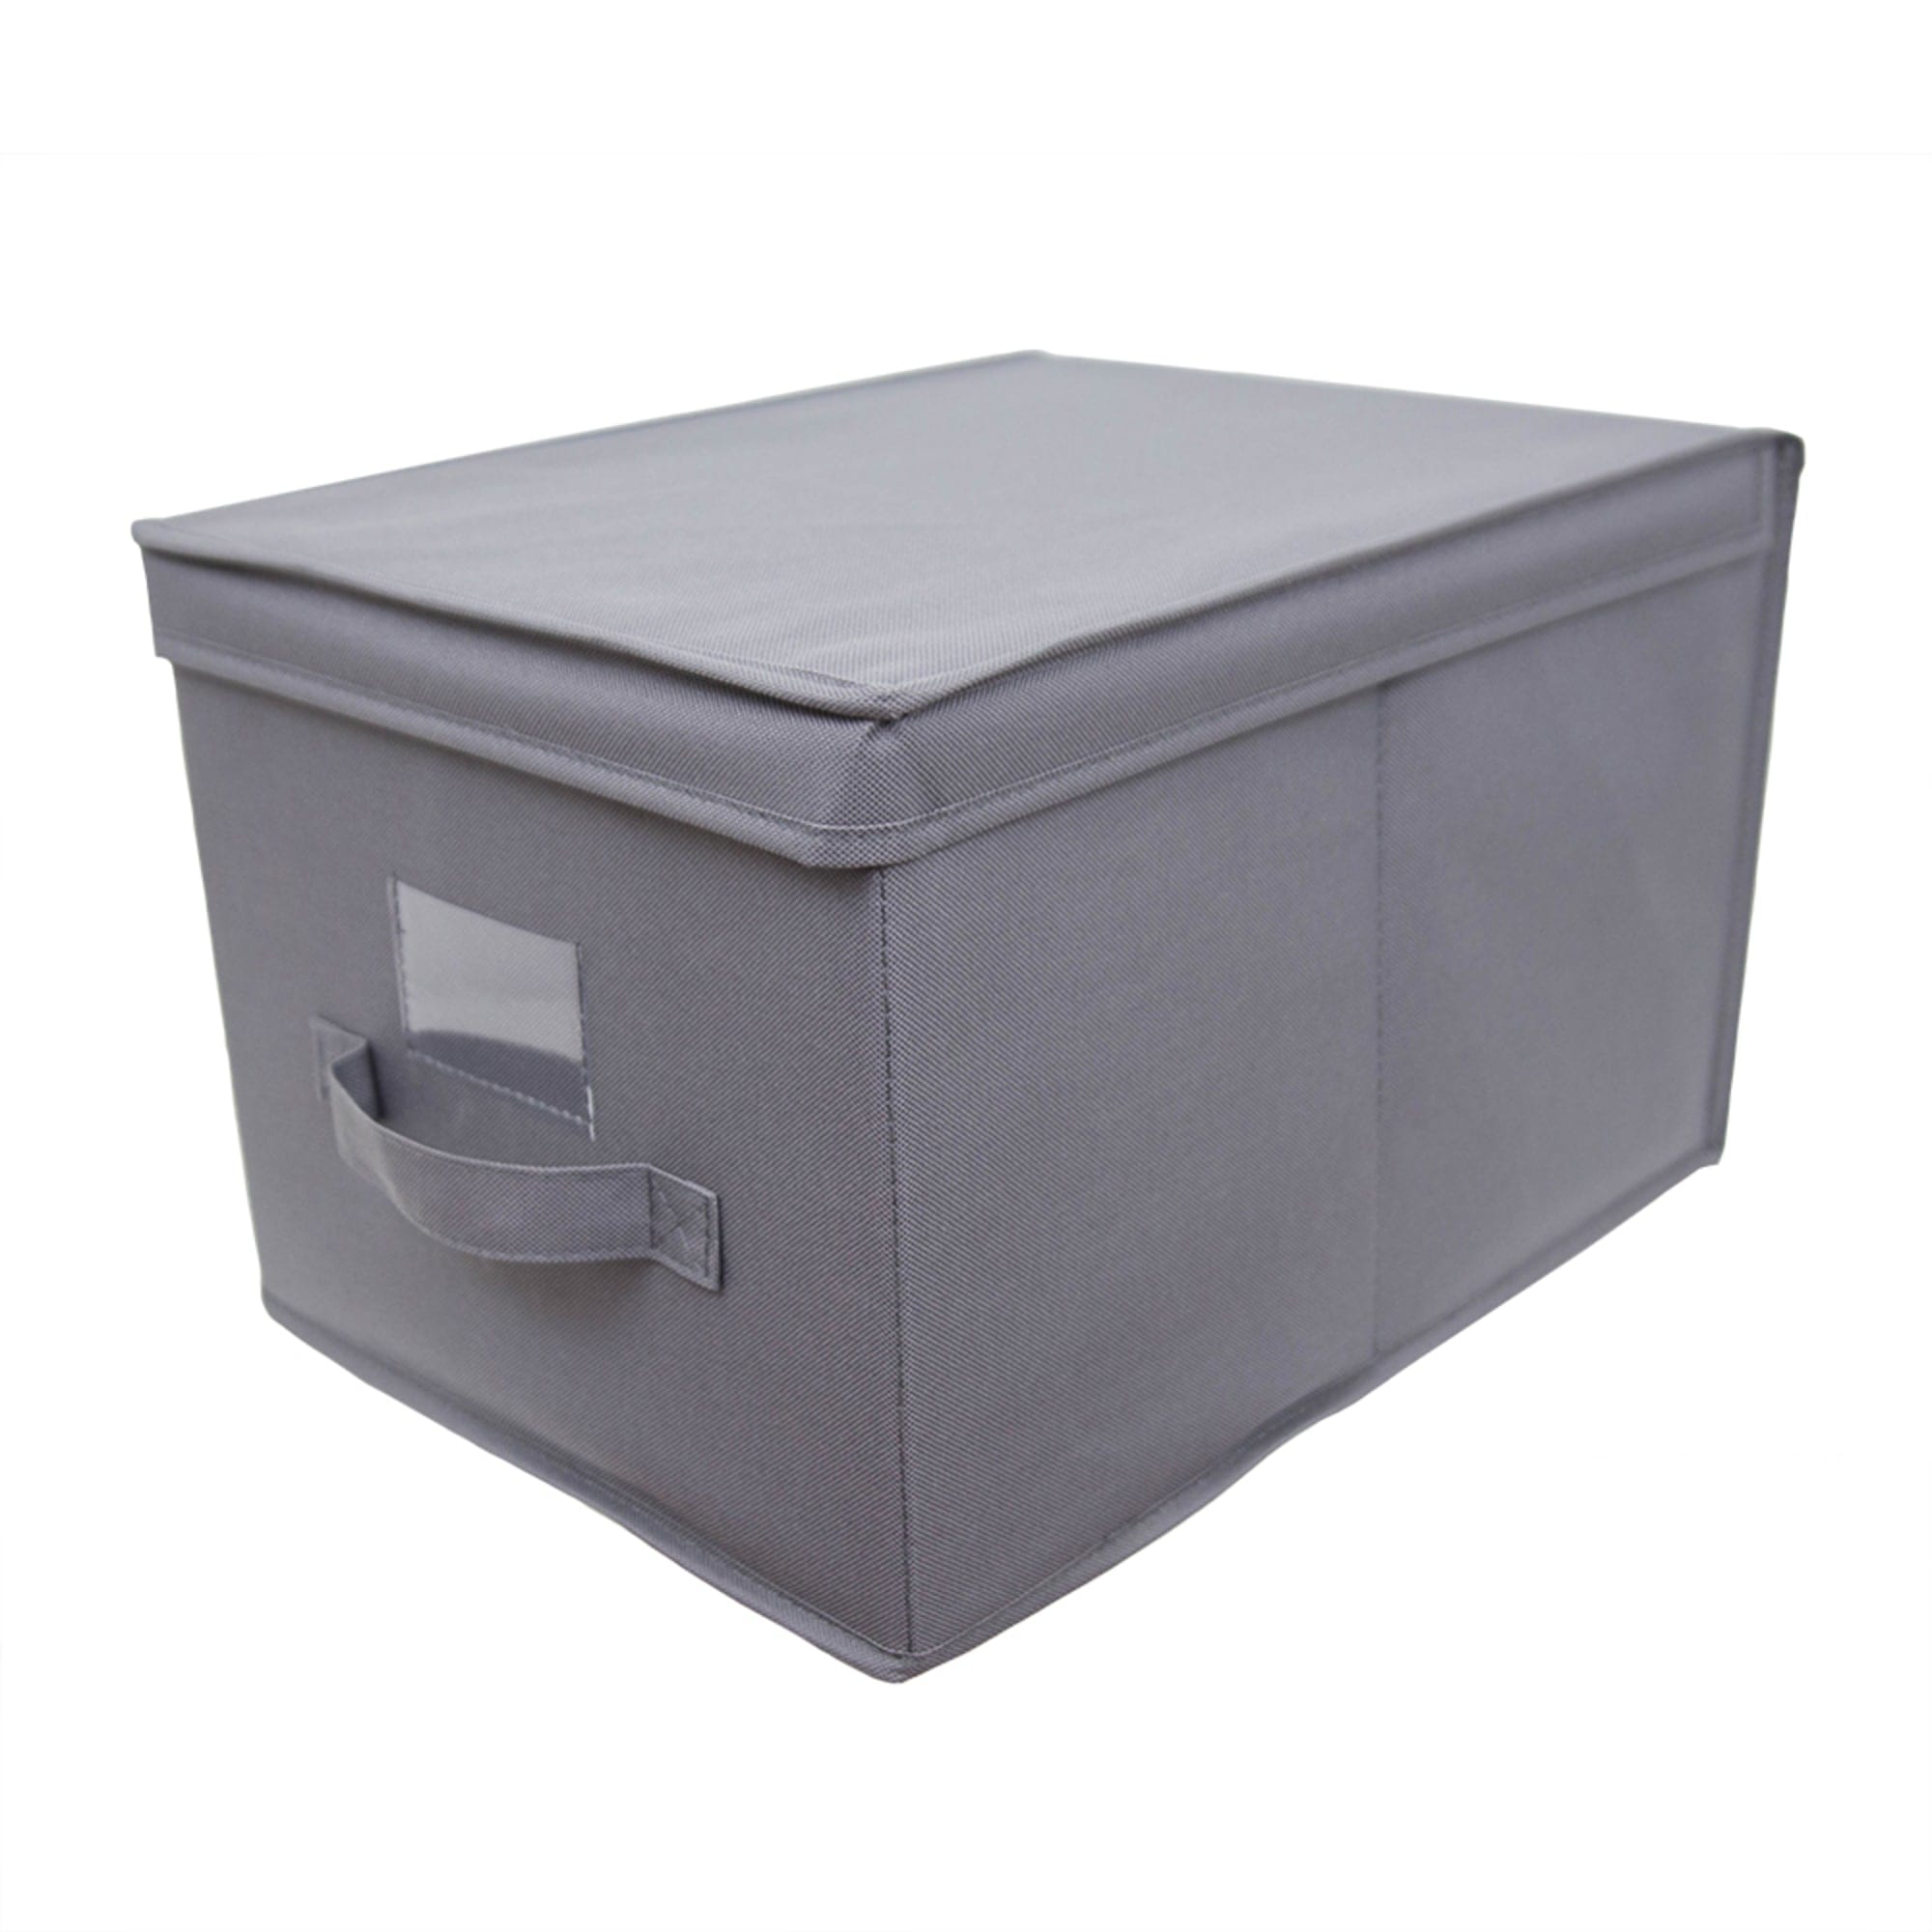 Home Basics 600D Polyester Large Storage Box, Grey $5.00 EACH, CASE PACK OF 12